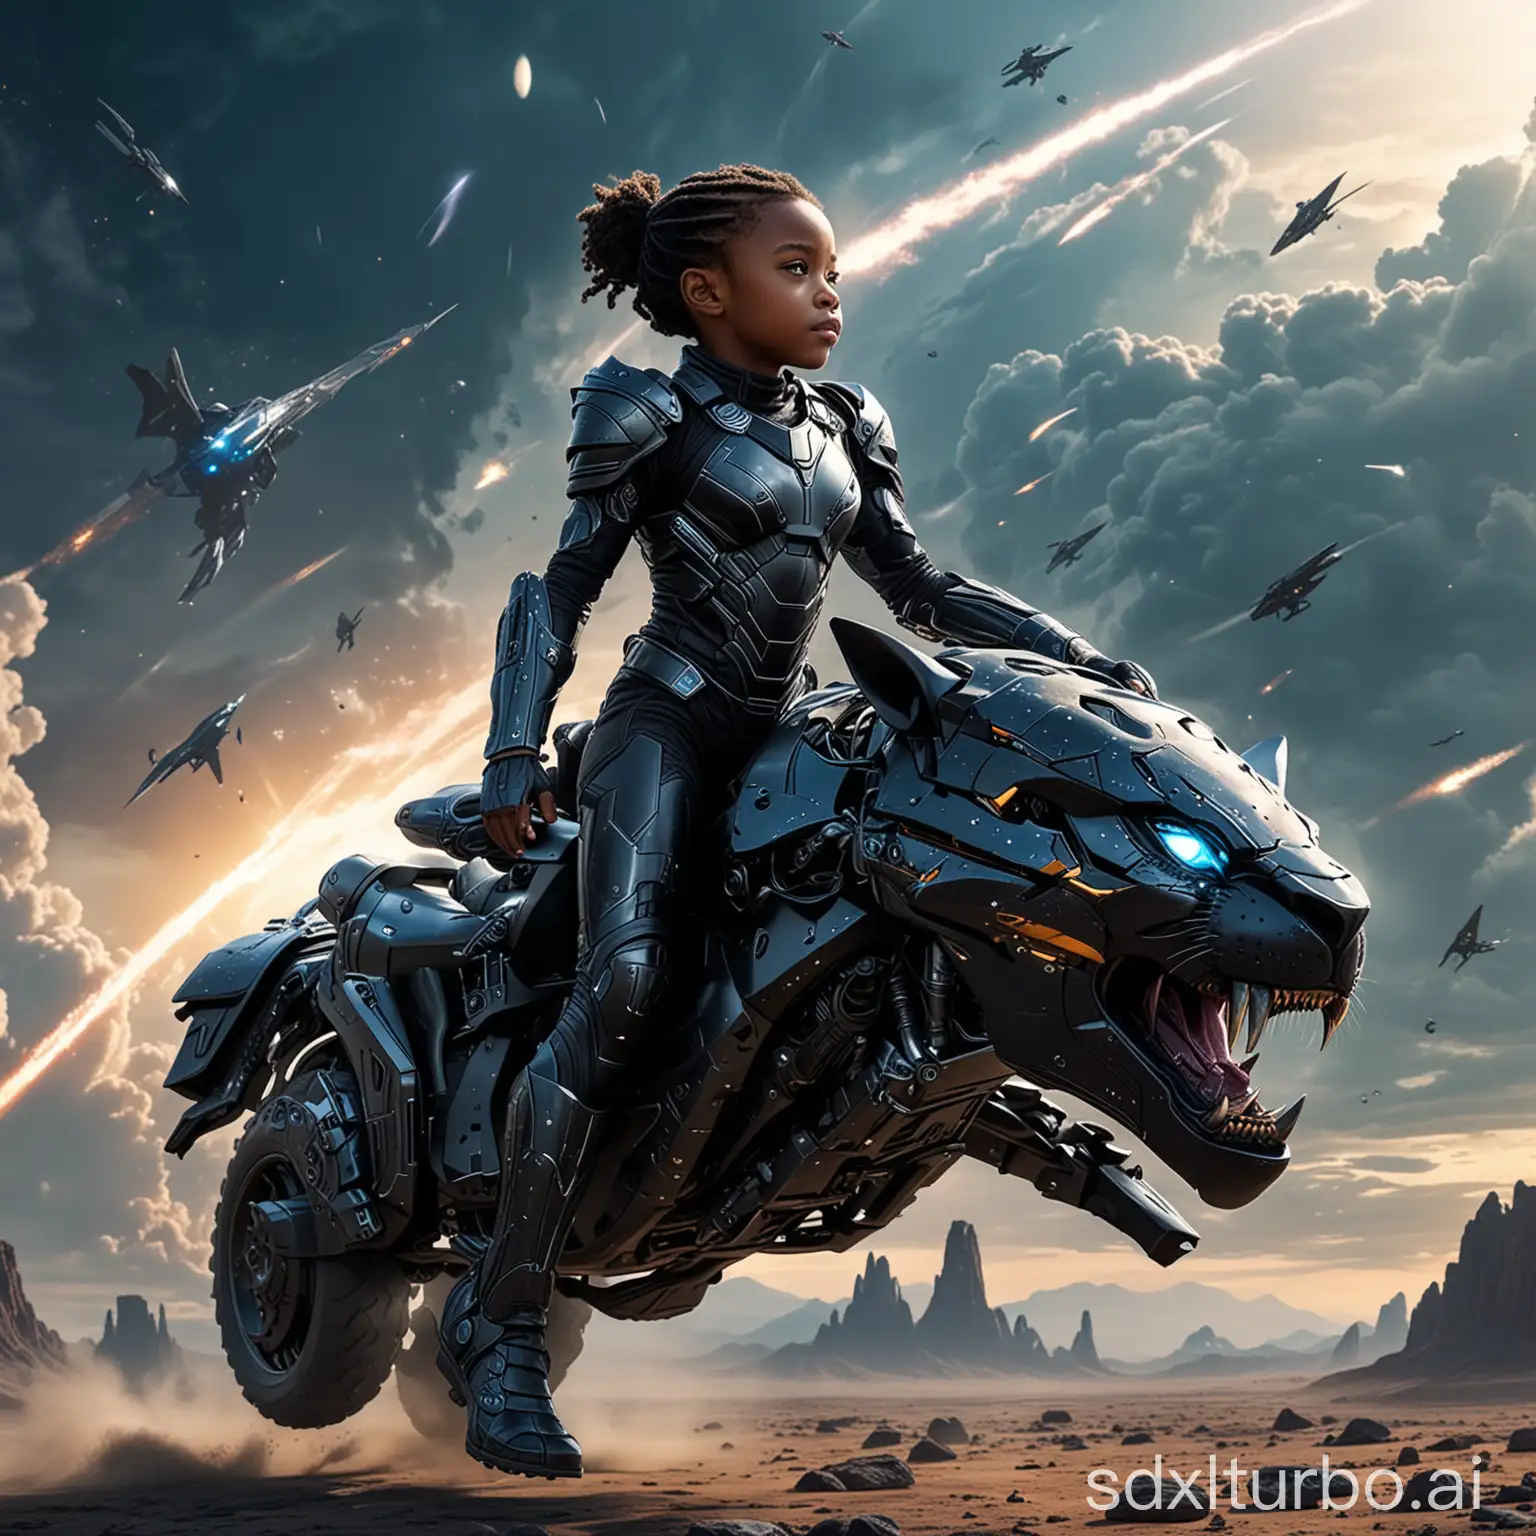 Futuristic-Girl-Riding-Panther-with-SciFi-Weapon-in-Space